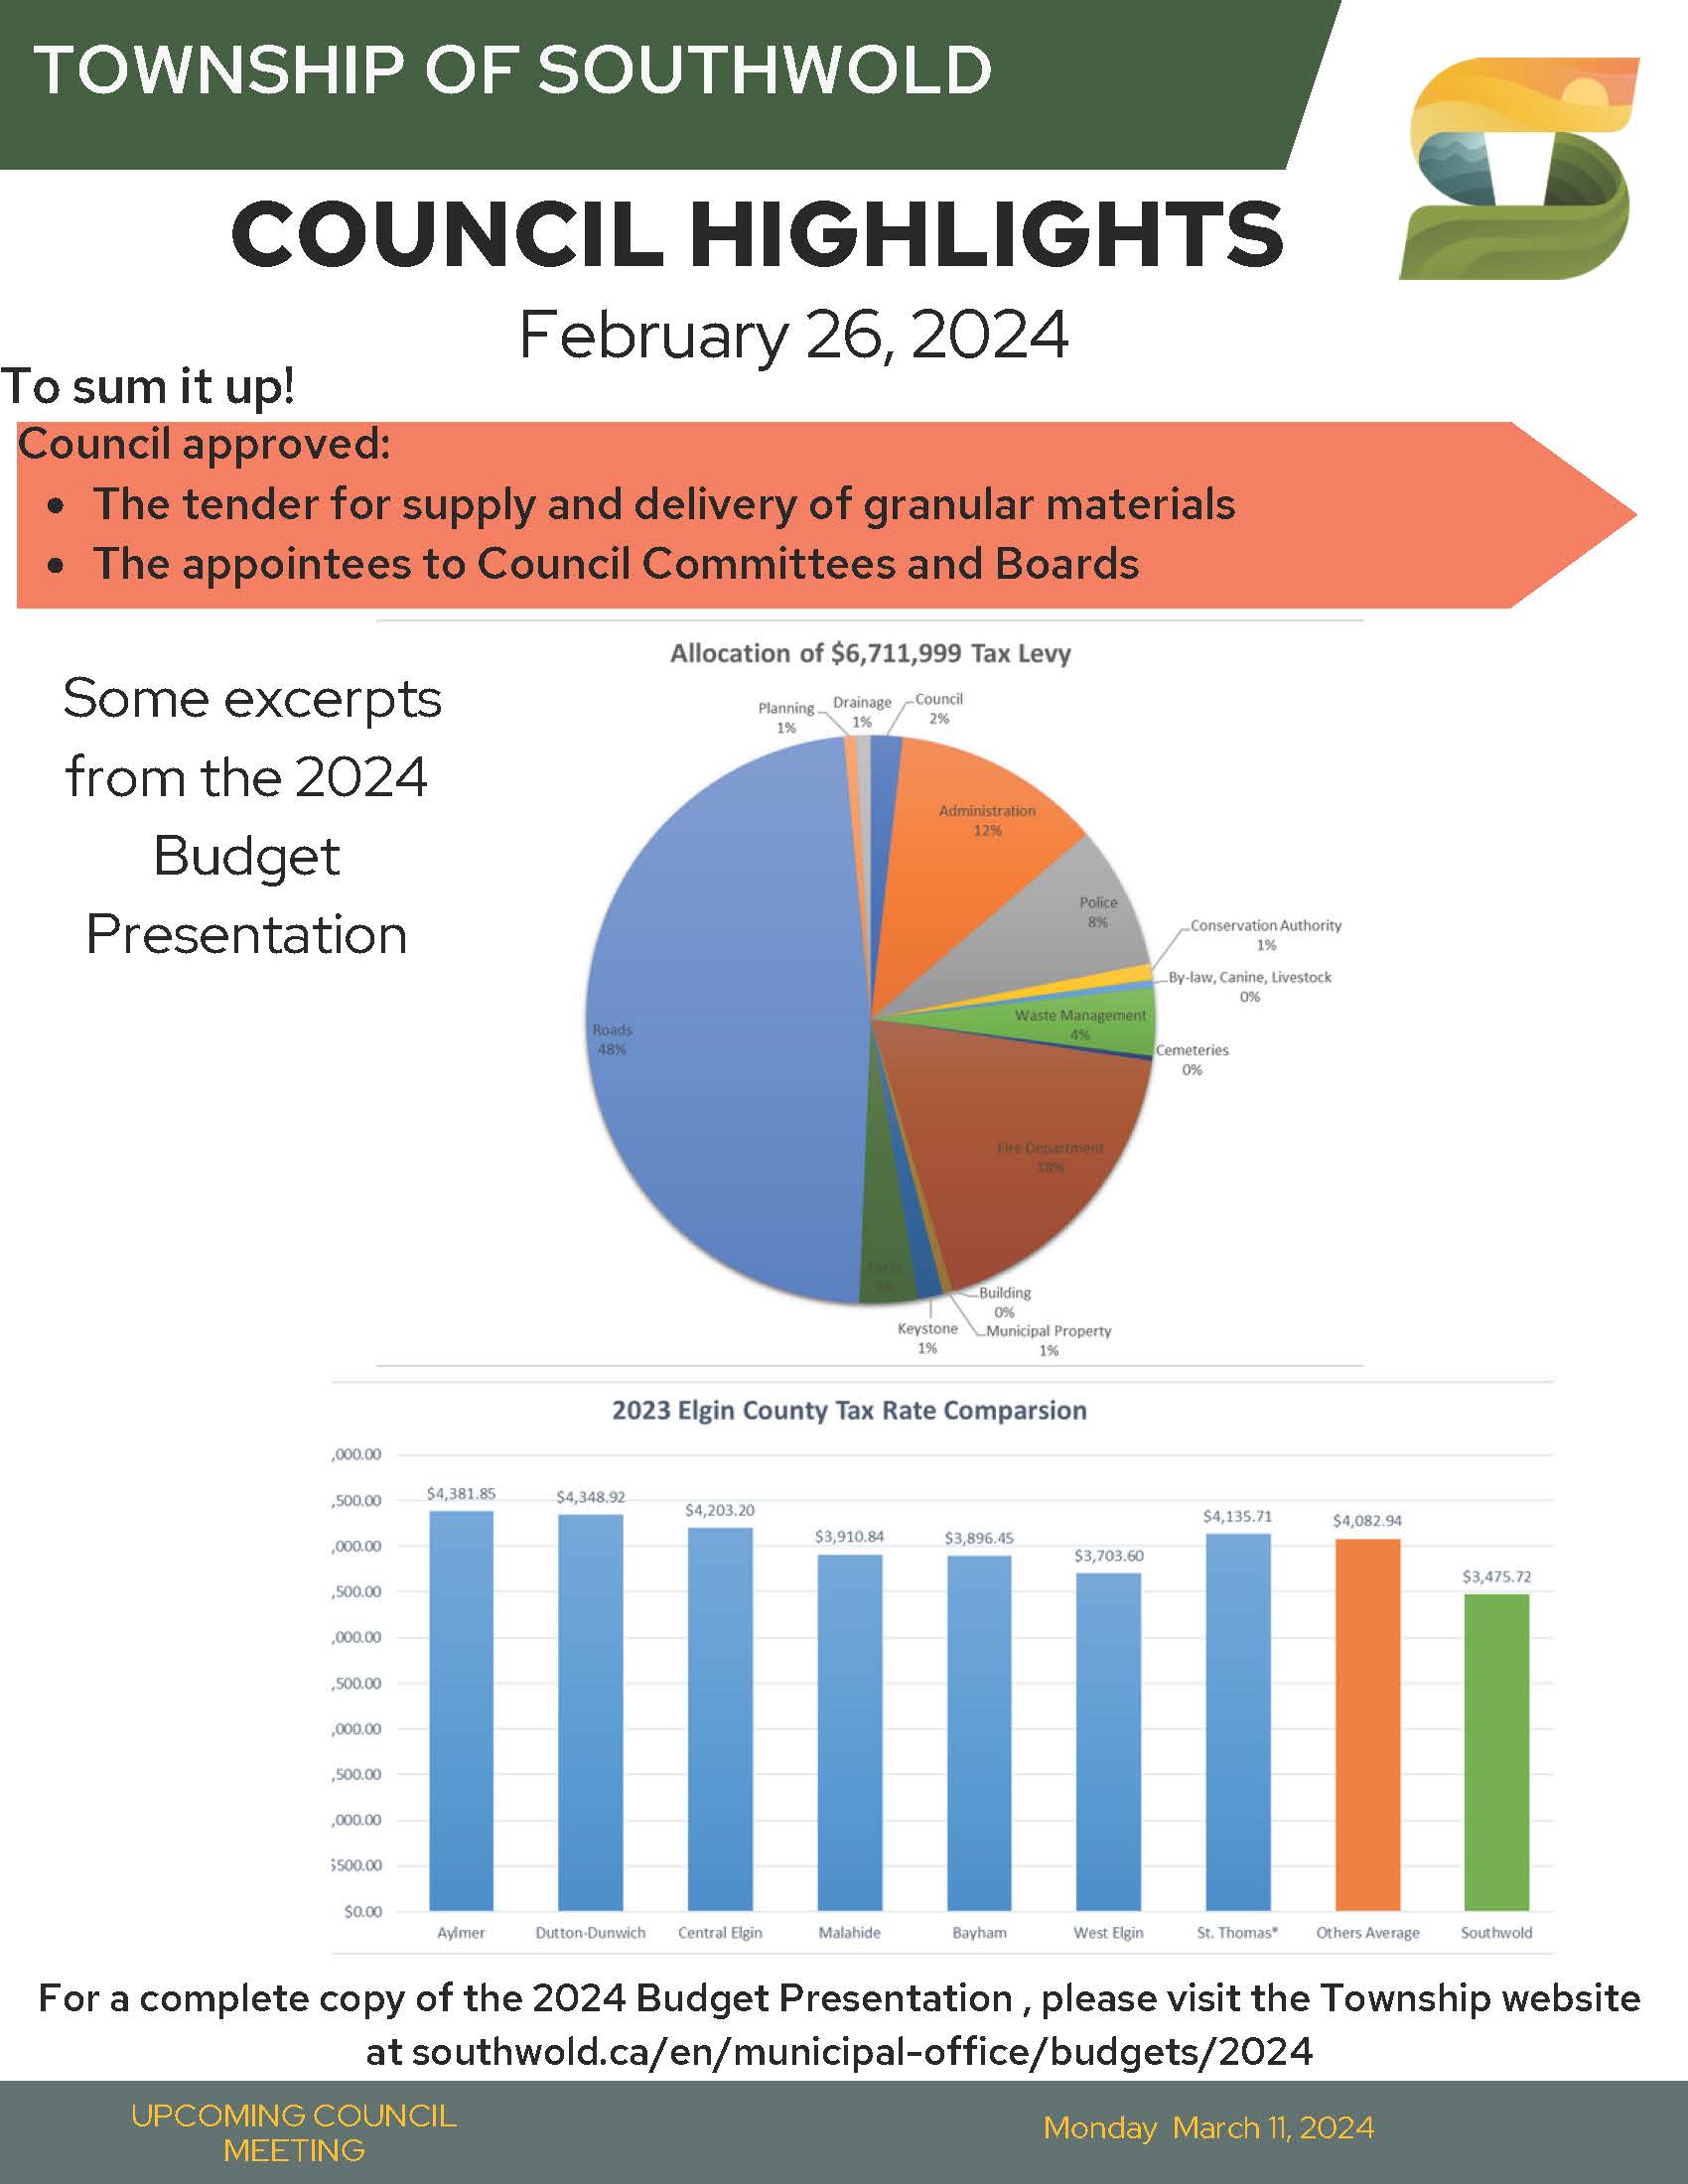 Council Highlights - February 26, 2024